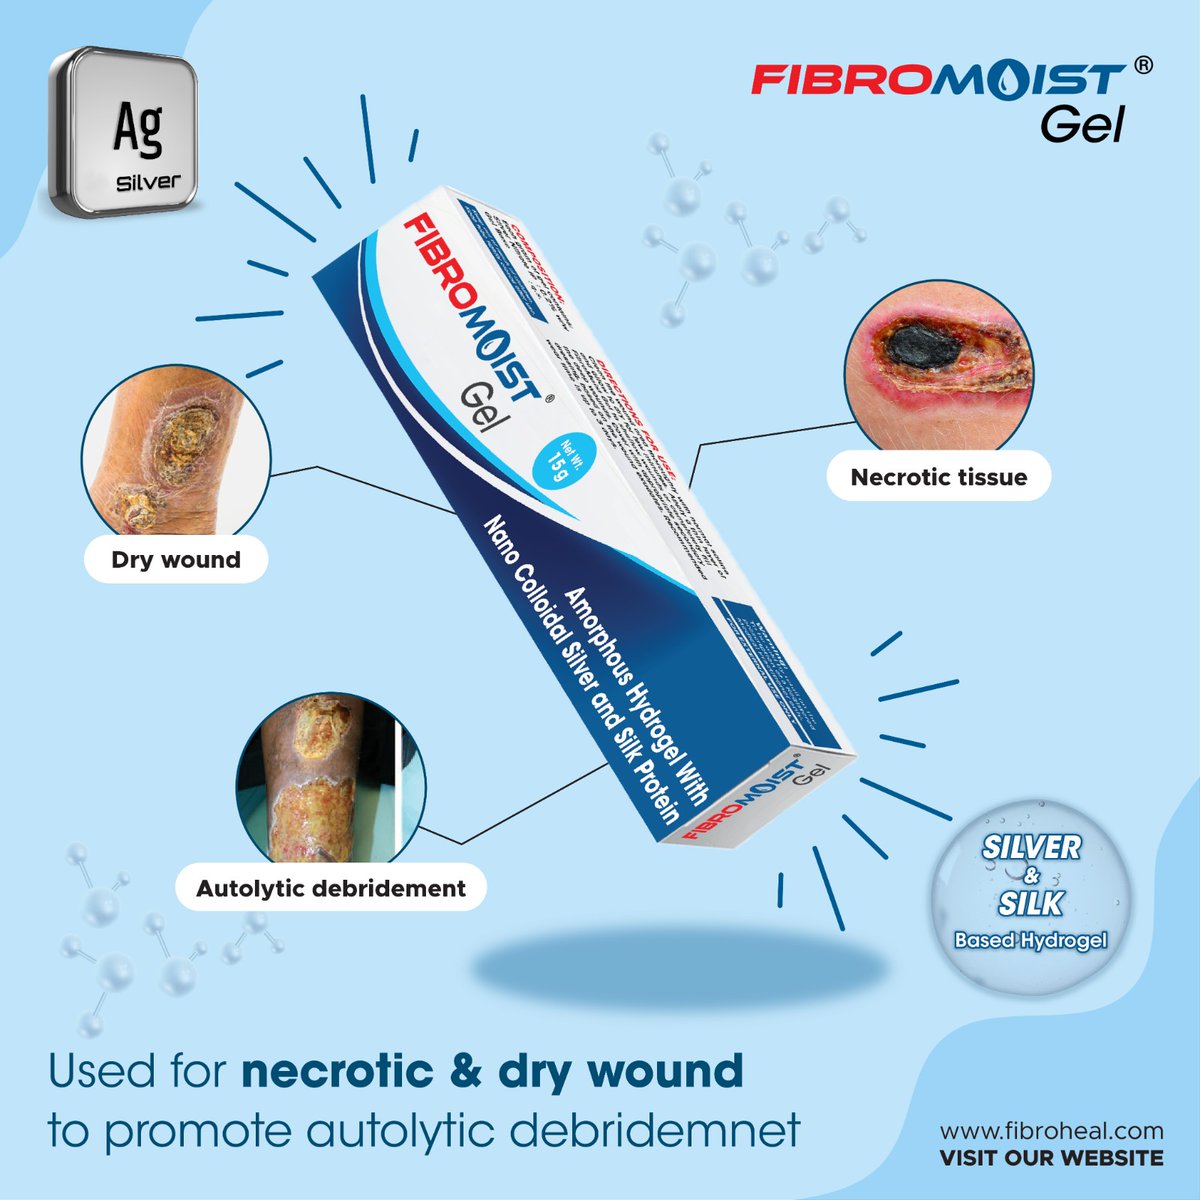 When you have a chance to heal the wound faster #fibroheal #woundcare @Fibroheal1 #woundmanagment #silkprotein